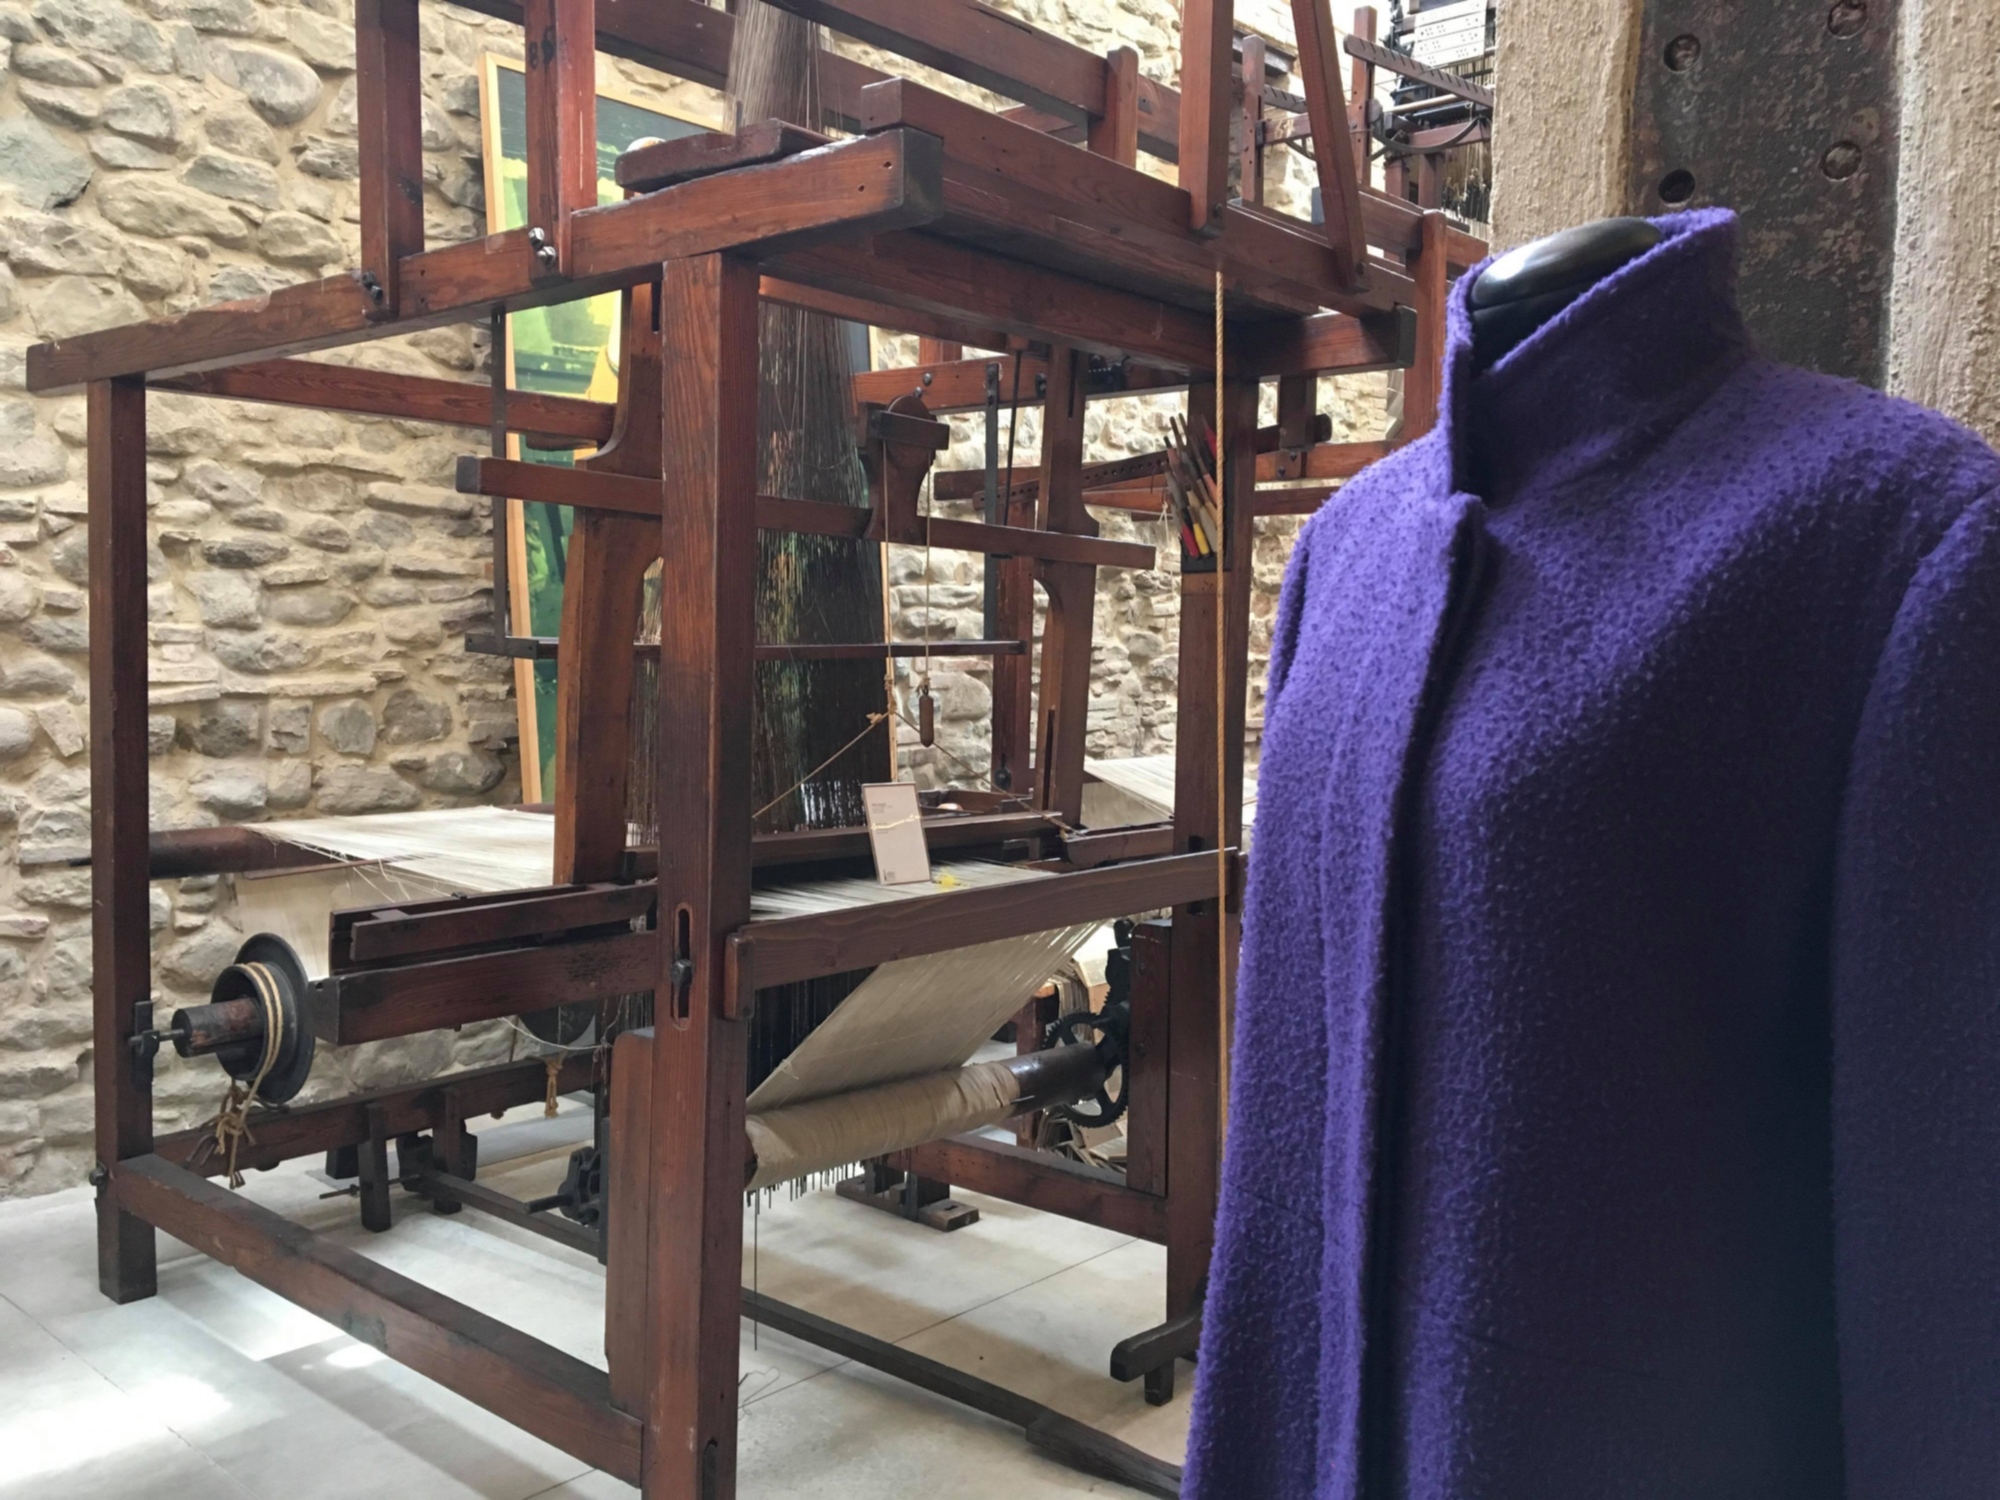 Casentino cloth on a traditional loom